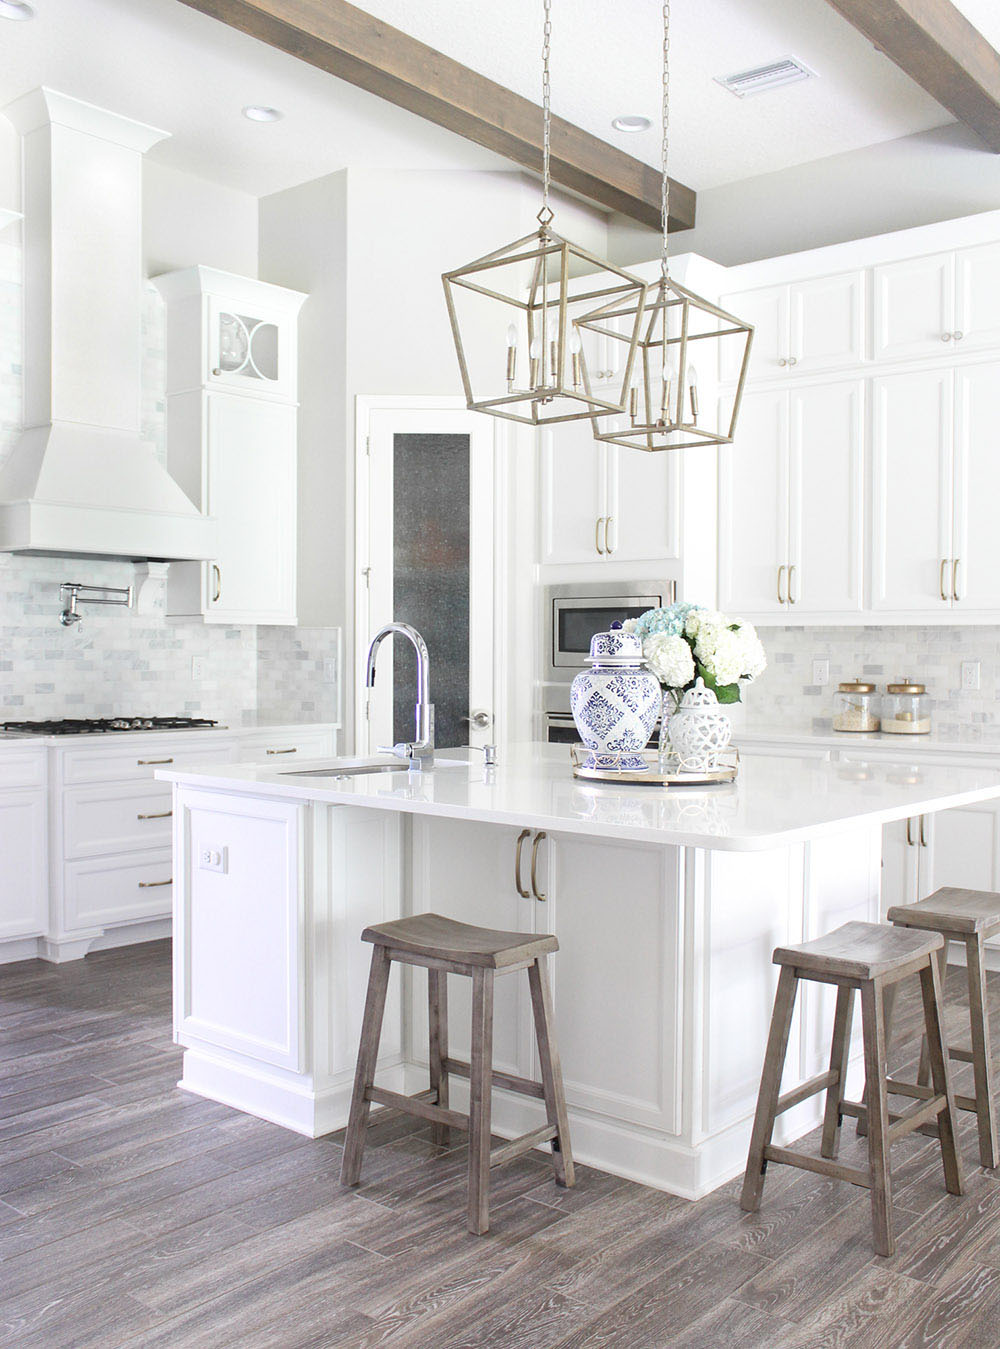 An updated white kitchen with wood beams on the ceilings.